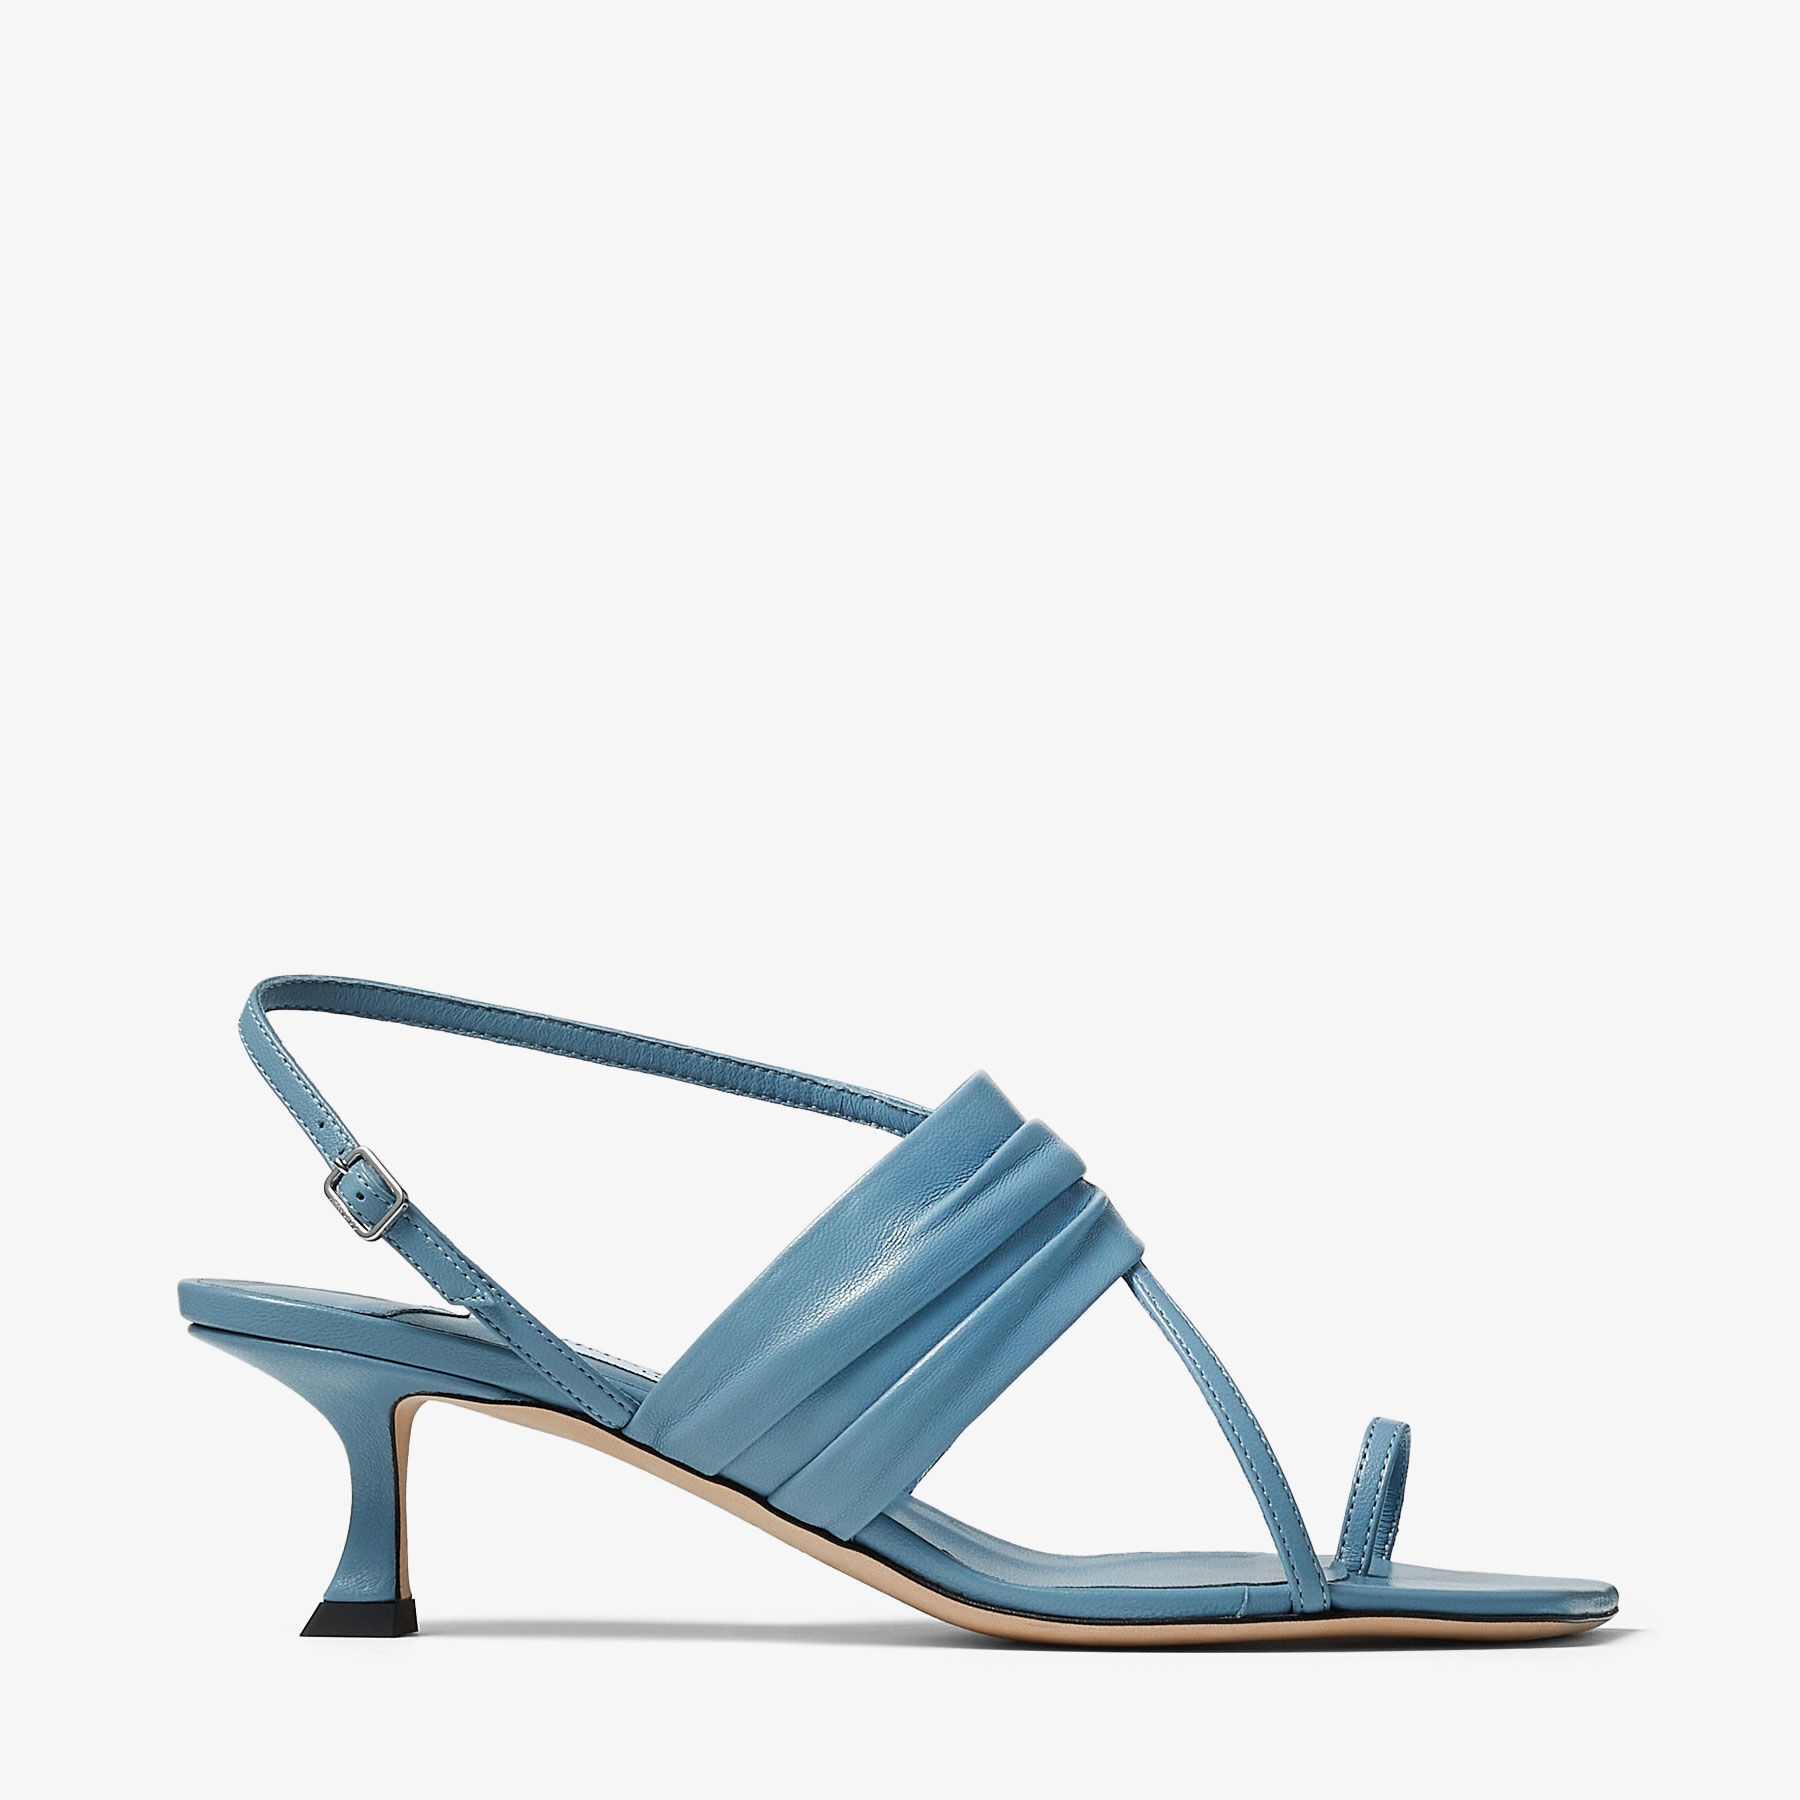 Beziers 50
Smoky Blue Nappa Leather Sandals - 1